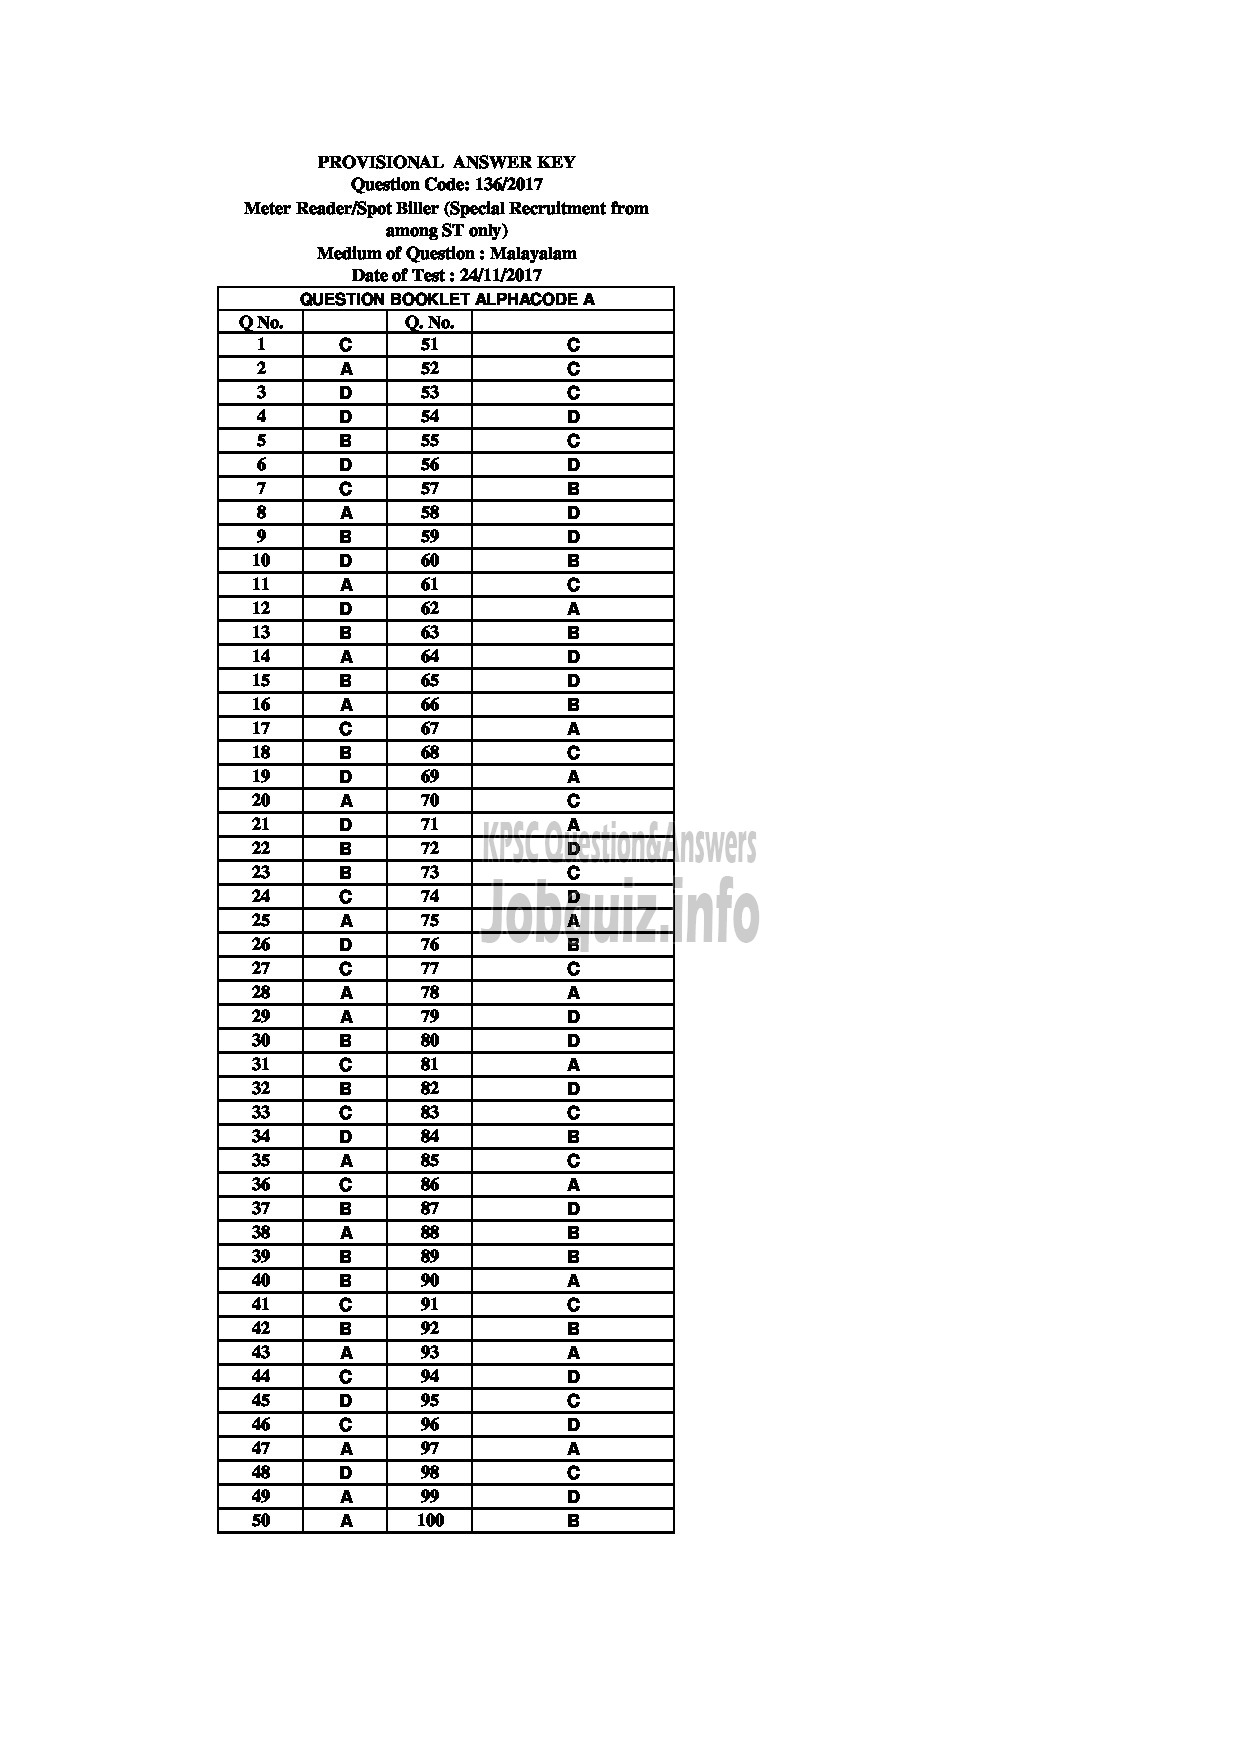 Kerala PSC Answer Key - METER READER/SPOT BILLER SPECIAL RECRUITMENT FROM AMONG ST ONLY MEDIUM OF QUESTION TAMIL